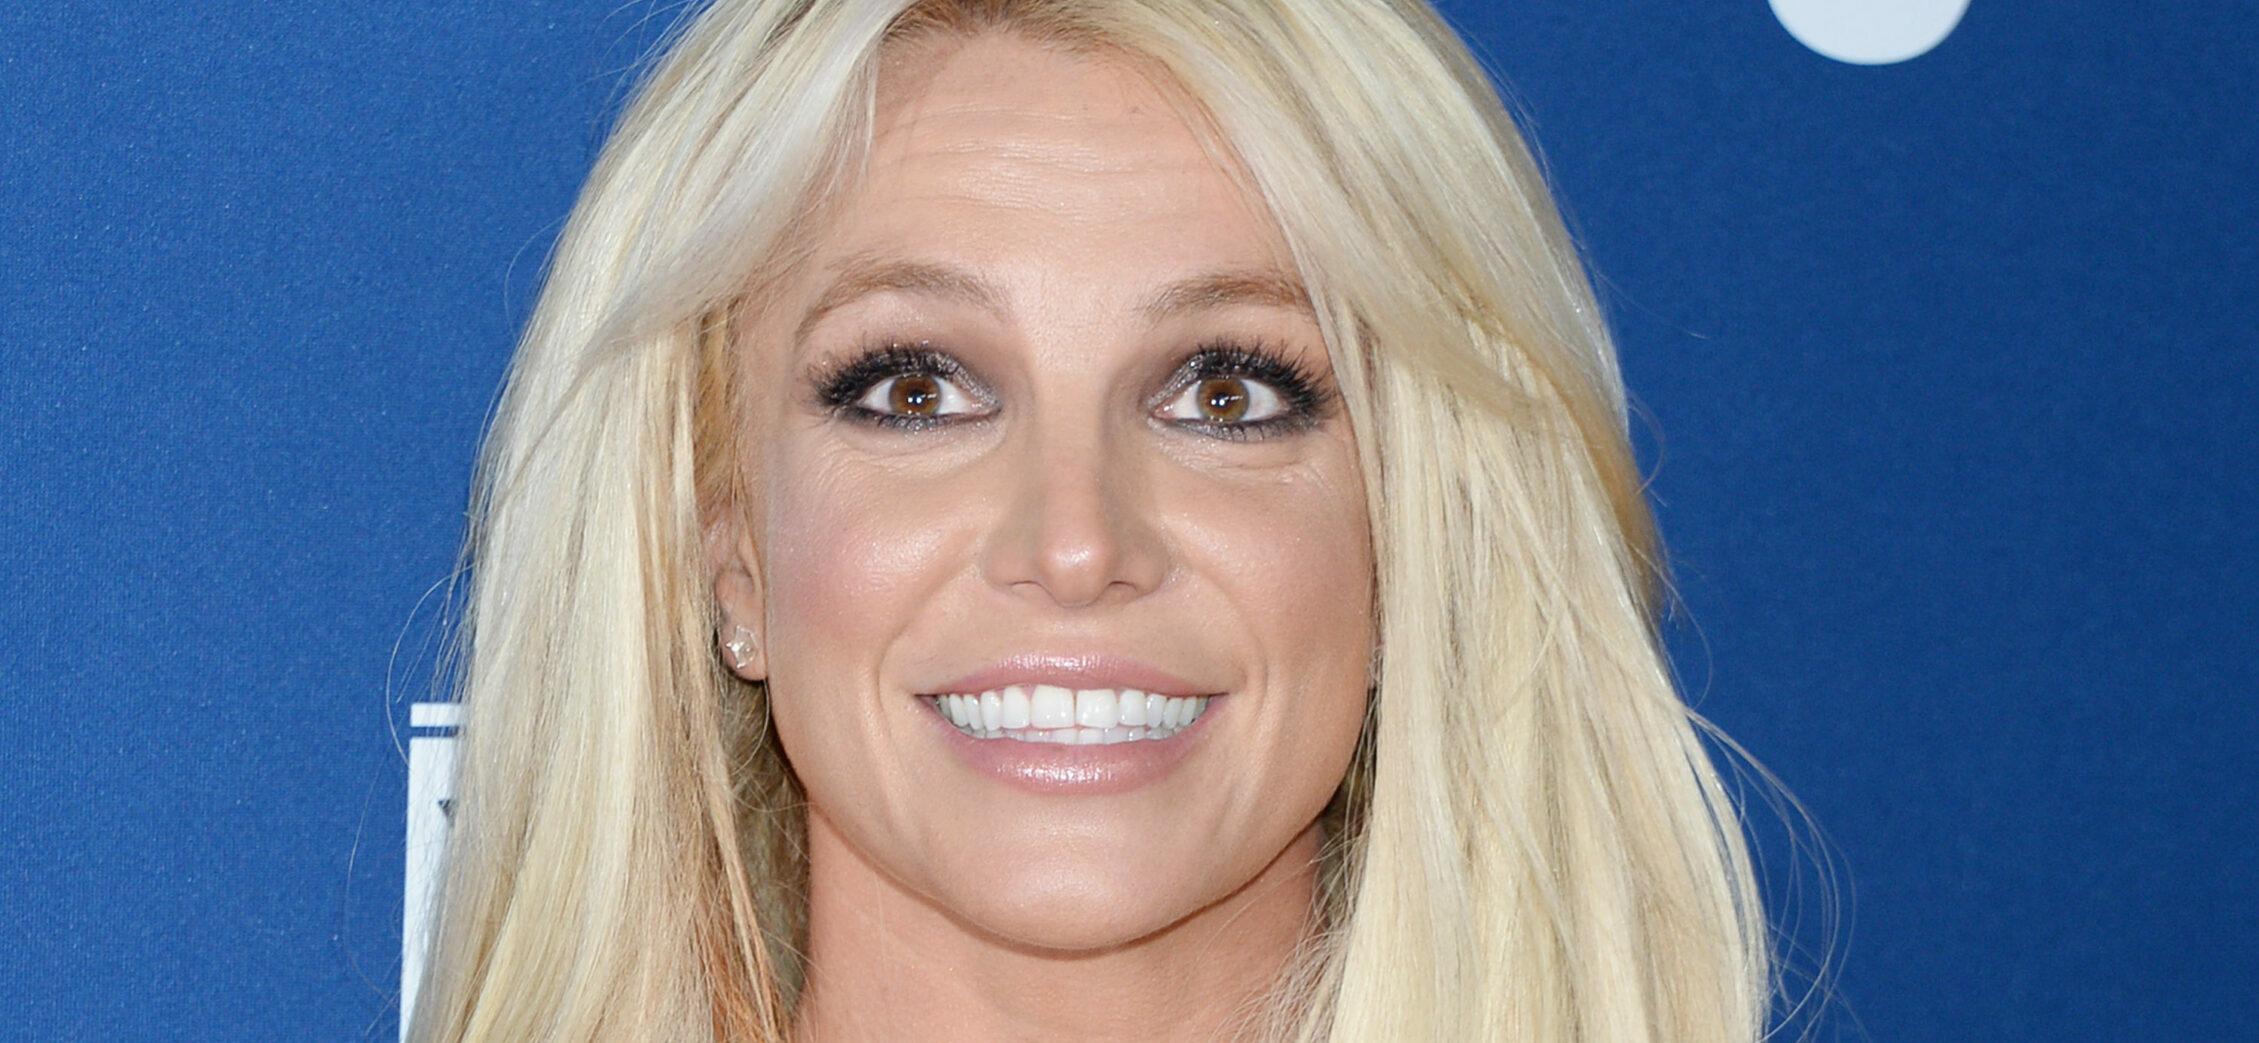 Britney Spears Has ‘Great News’ To Share With Her Fans!